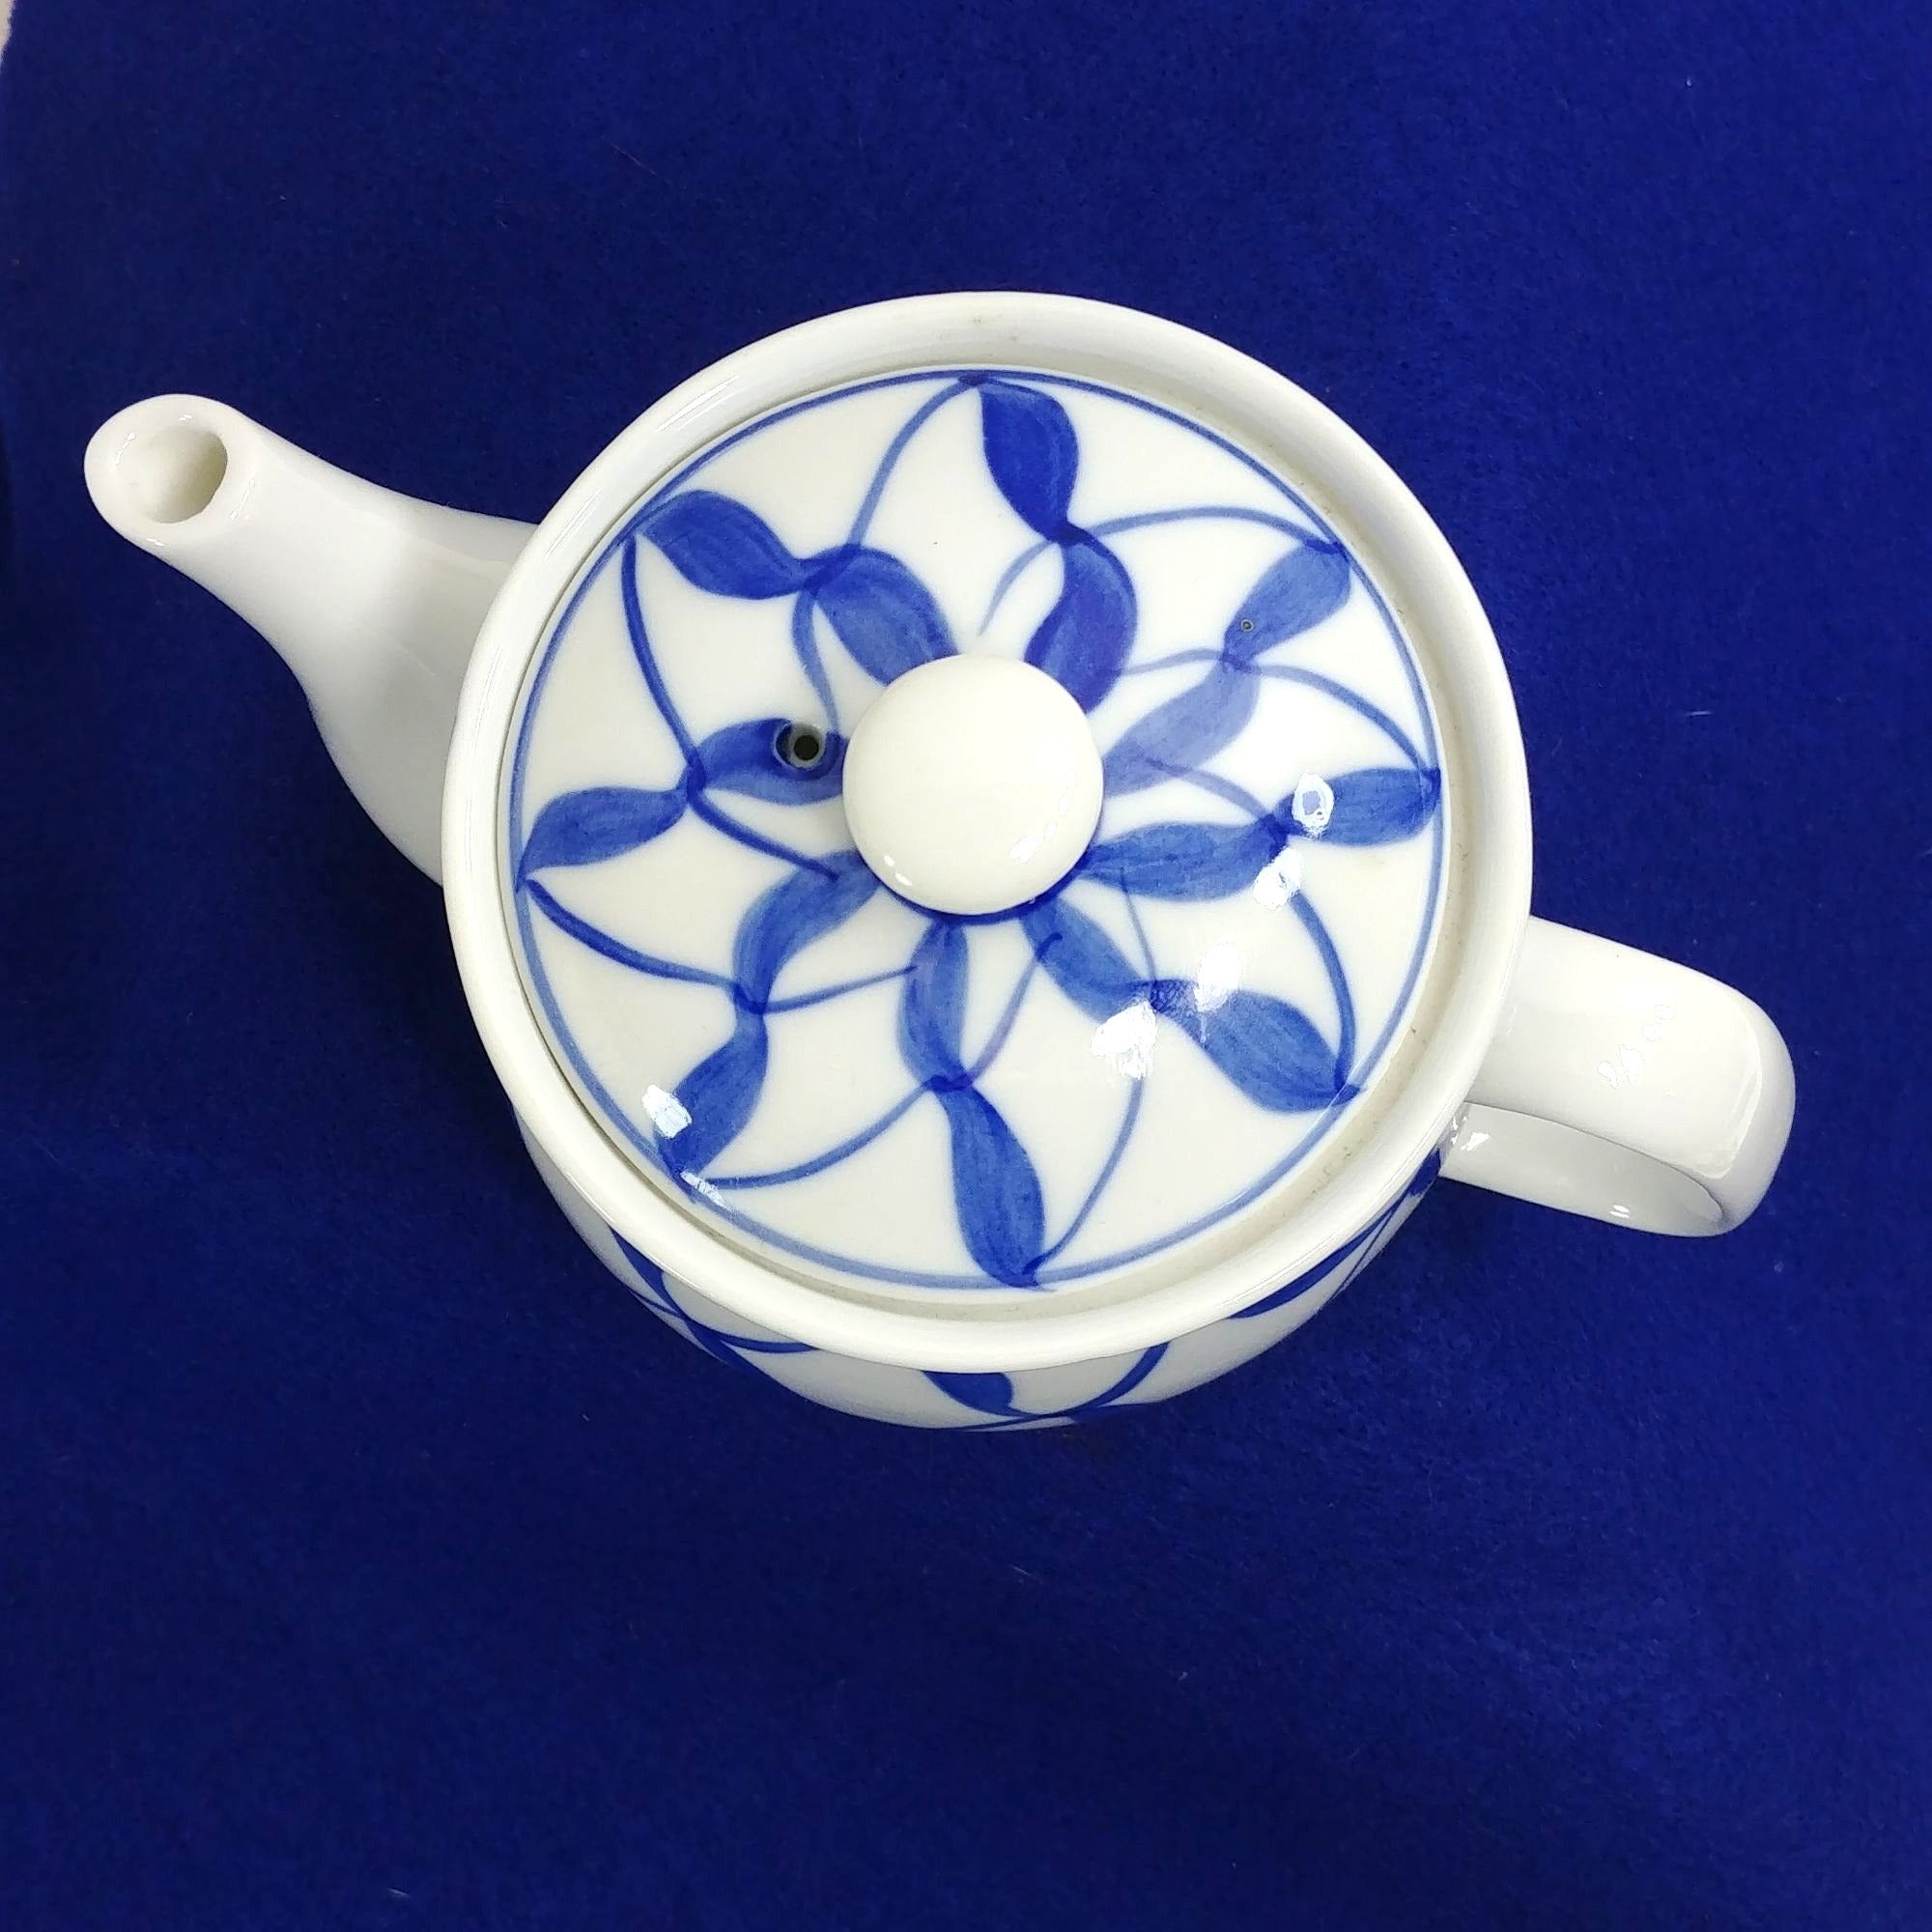 Asian Japanese Teapot with Lid Internal Metal Strainer Blue Trellis Chop Marked